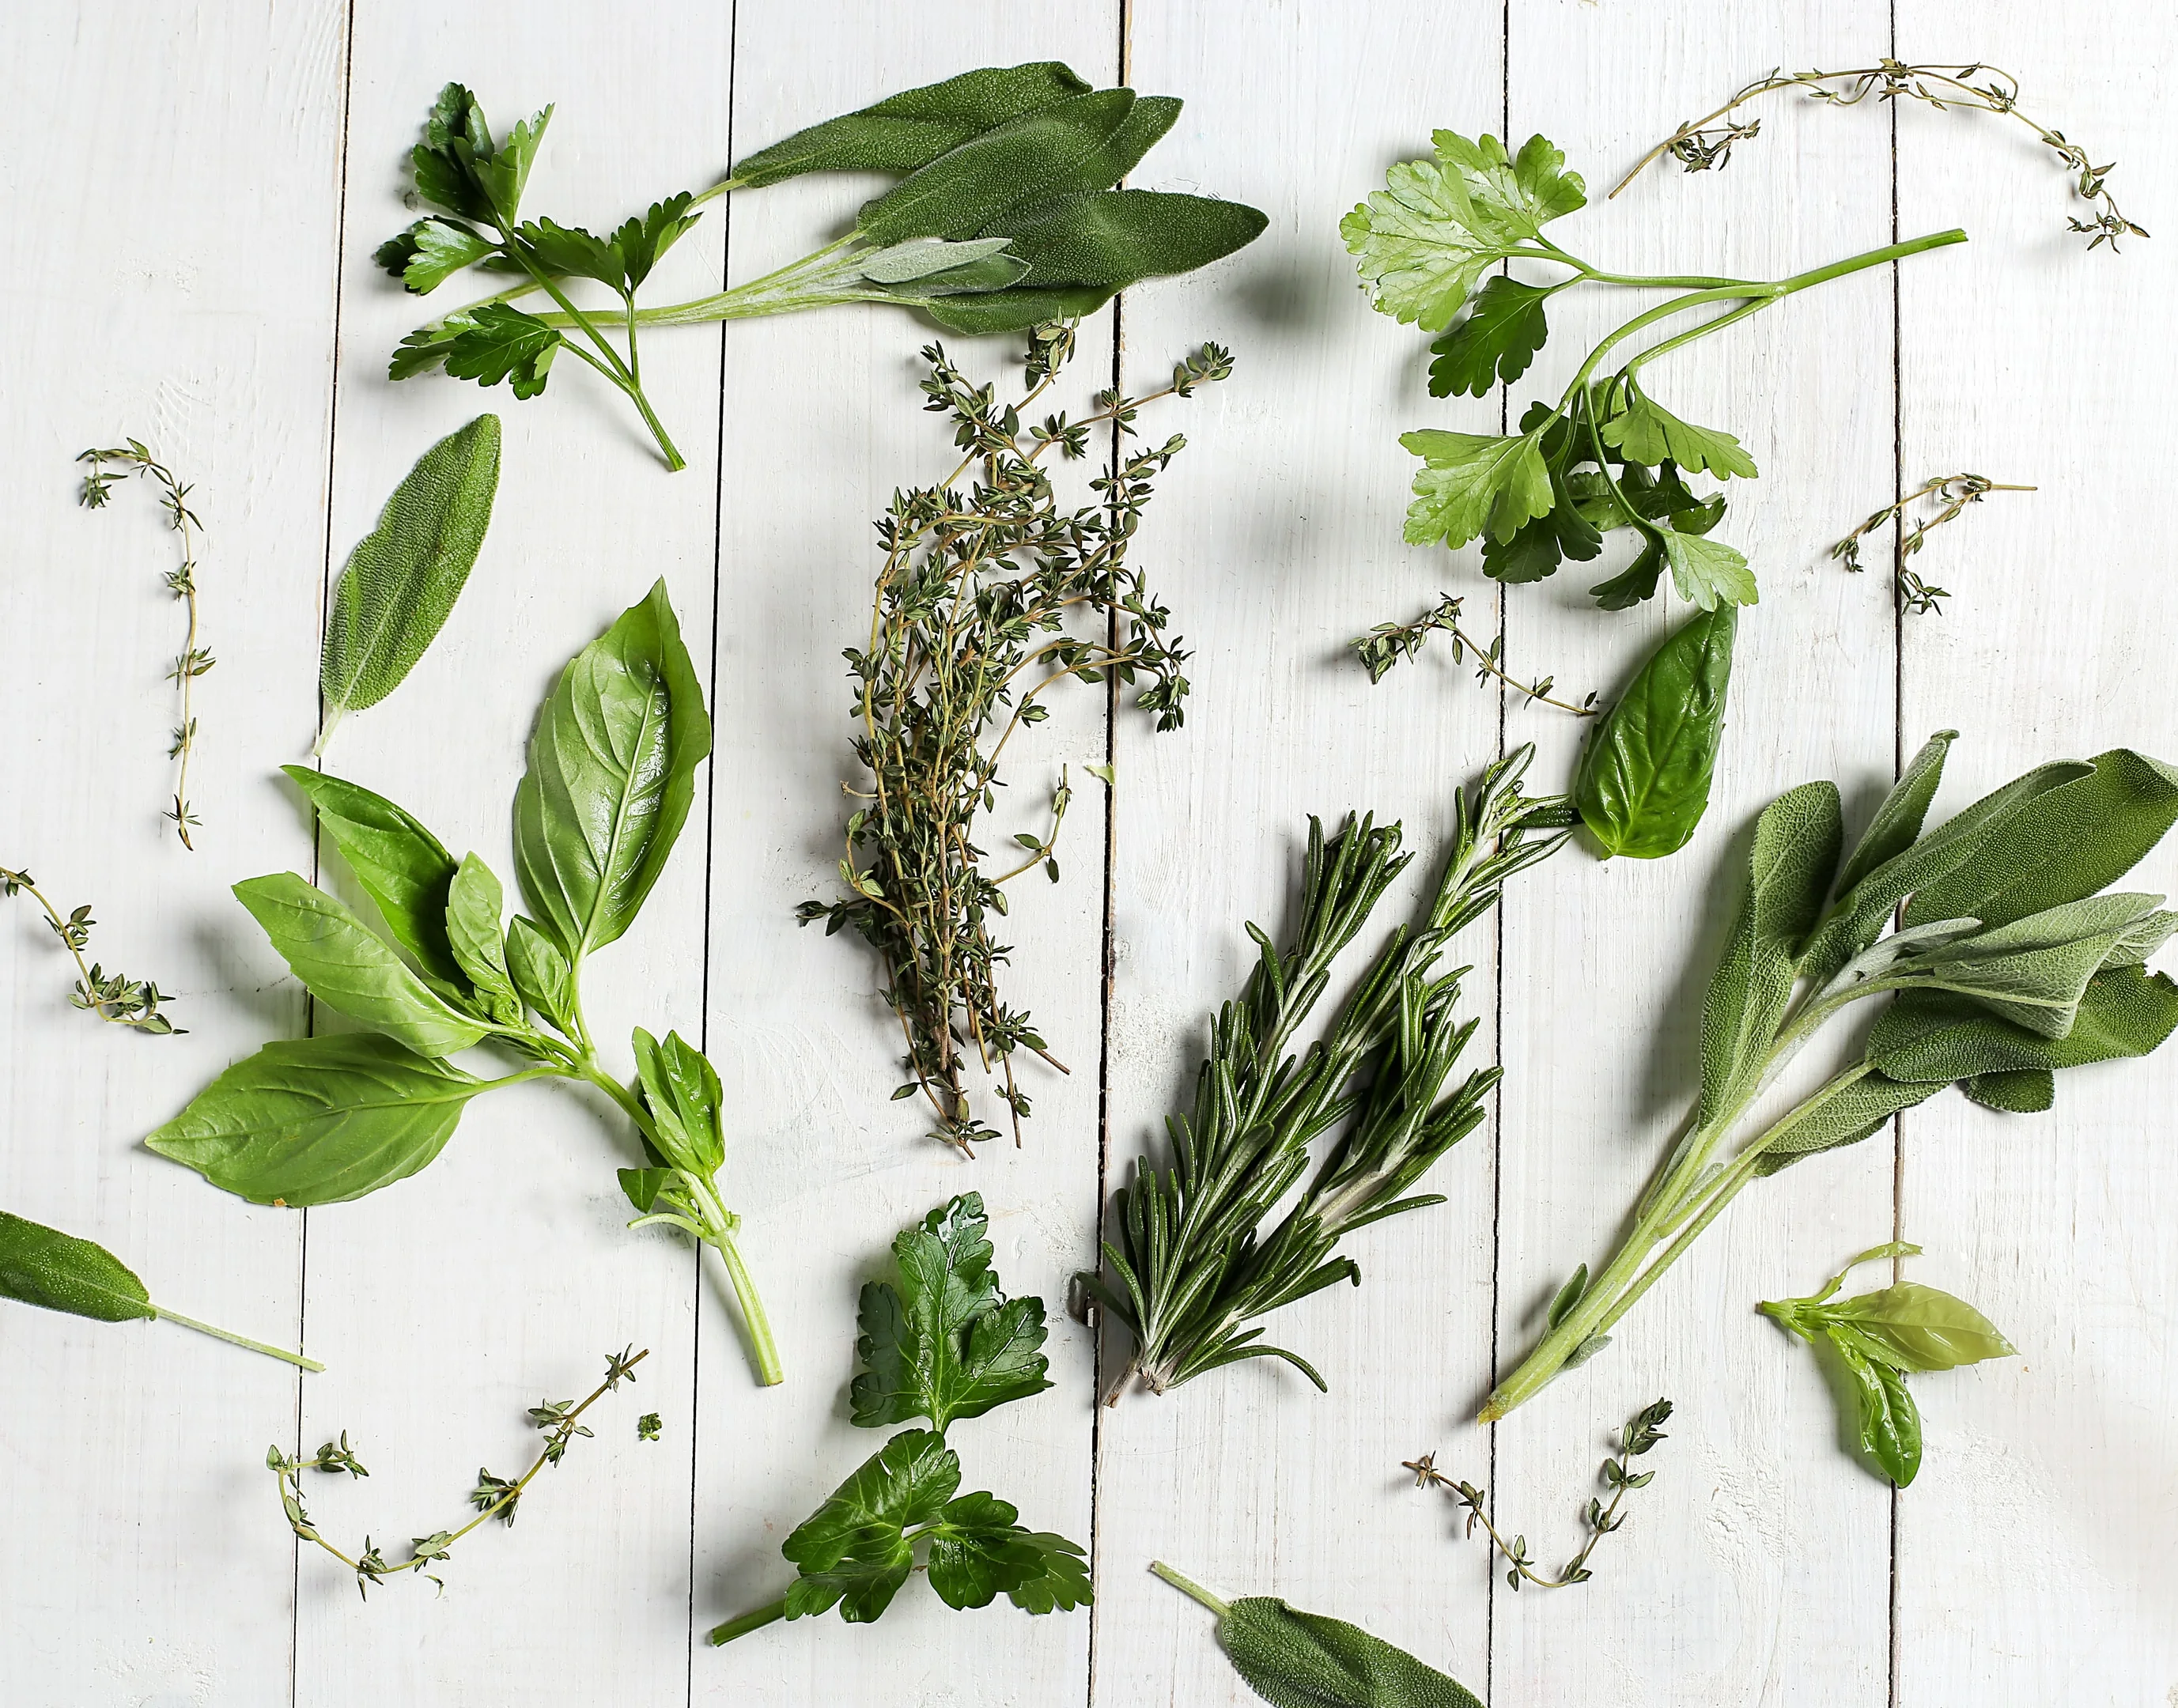 Culinary herbs on a table